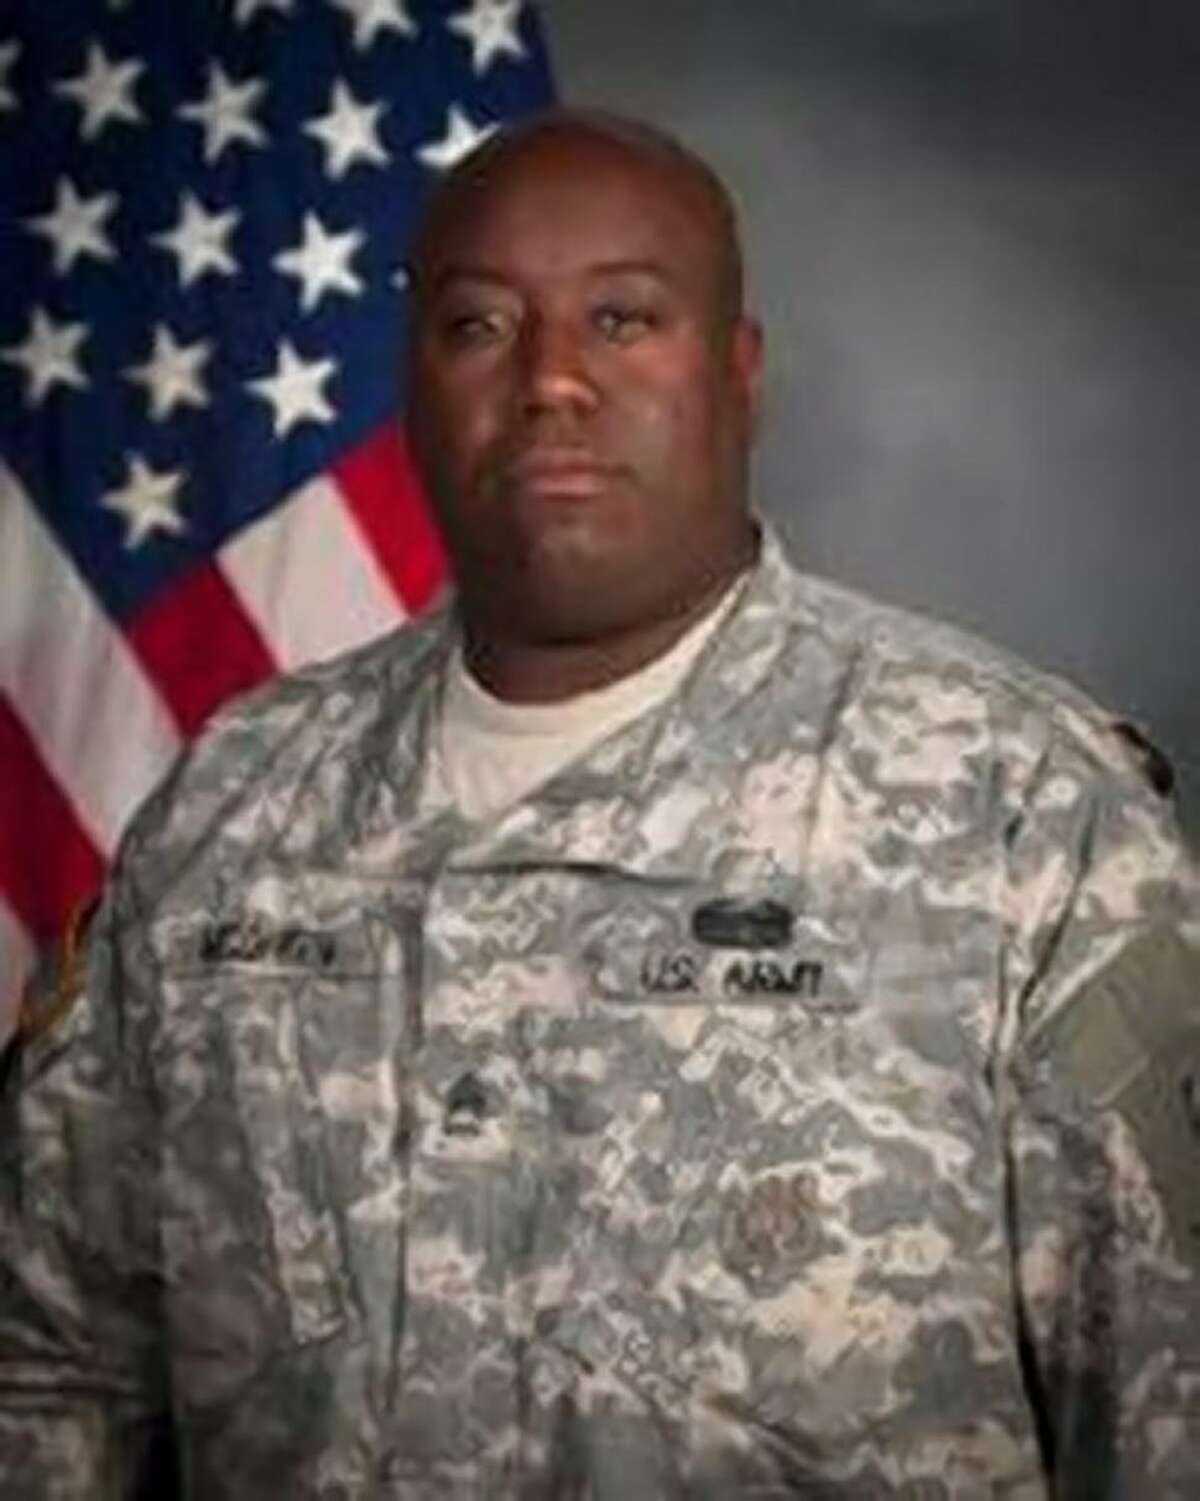 Sgt. 1st Class Gregory McQueen*Editor's Note: An earlier version of this story included photos of a person that is not McQueen. A Fort Hood liaison misidentified Sgt. 1st Class Gregory McQueen to journalists gathered prior to the hearing for the non-commissioned officer.